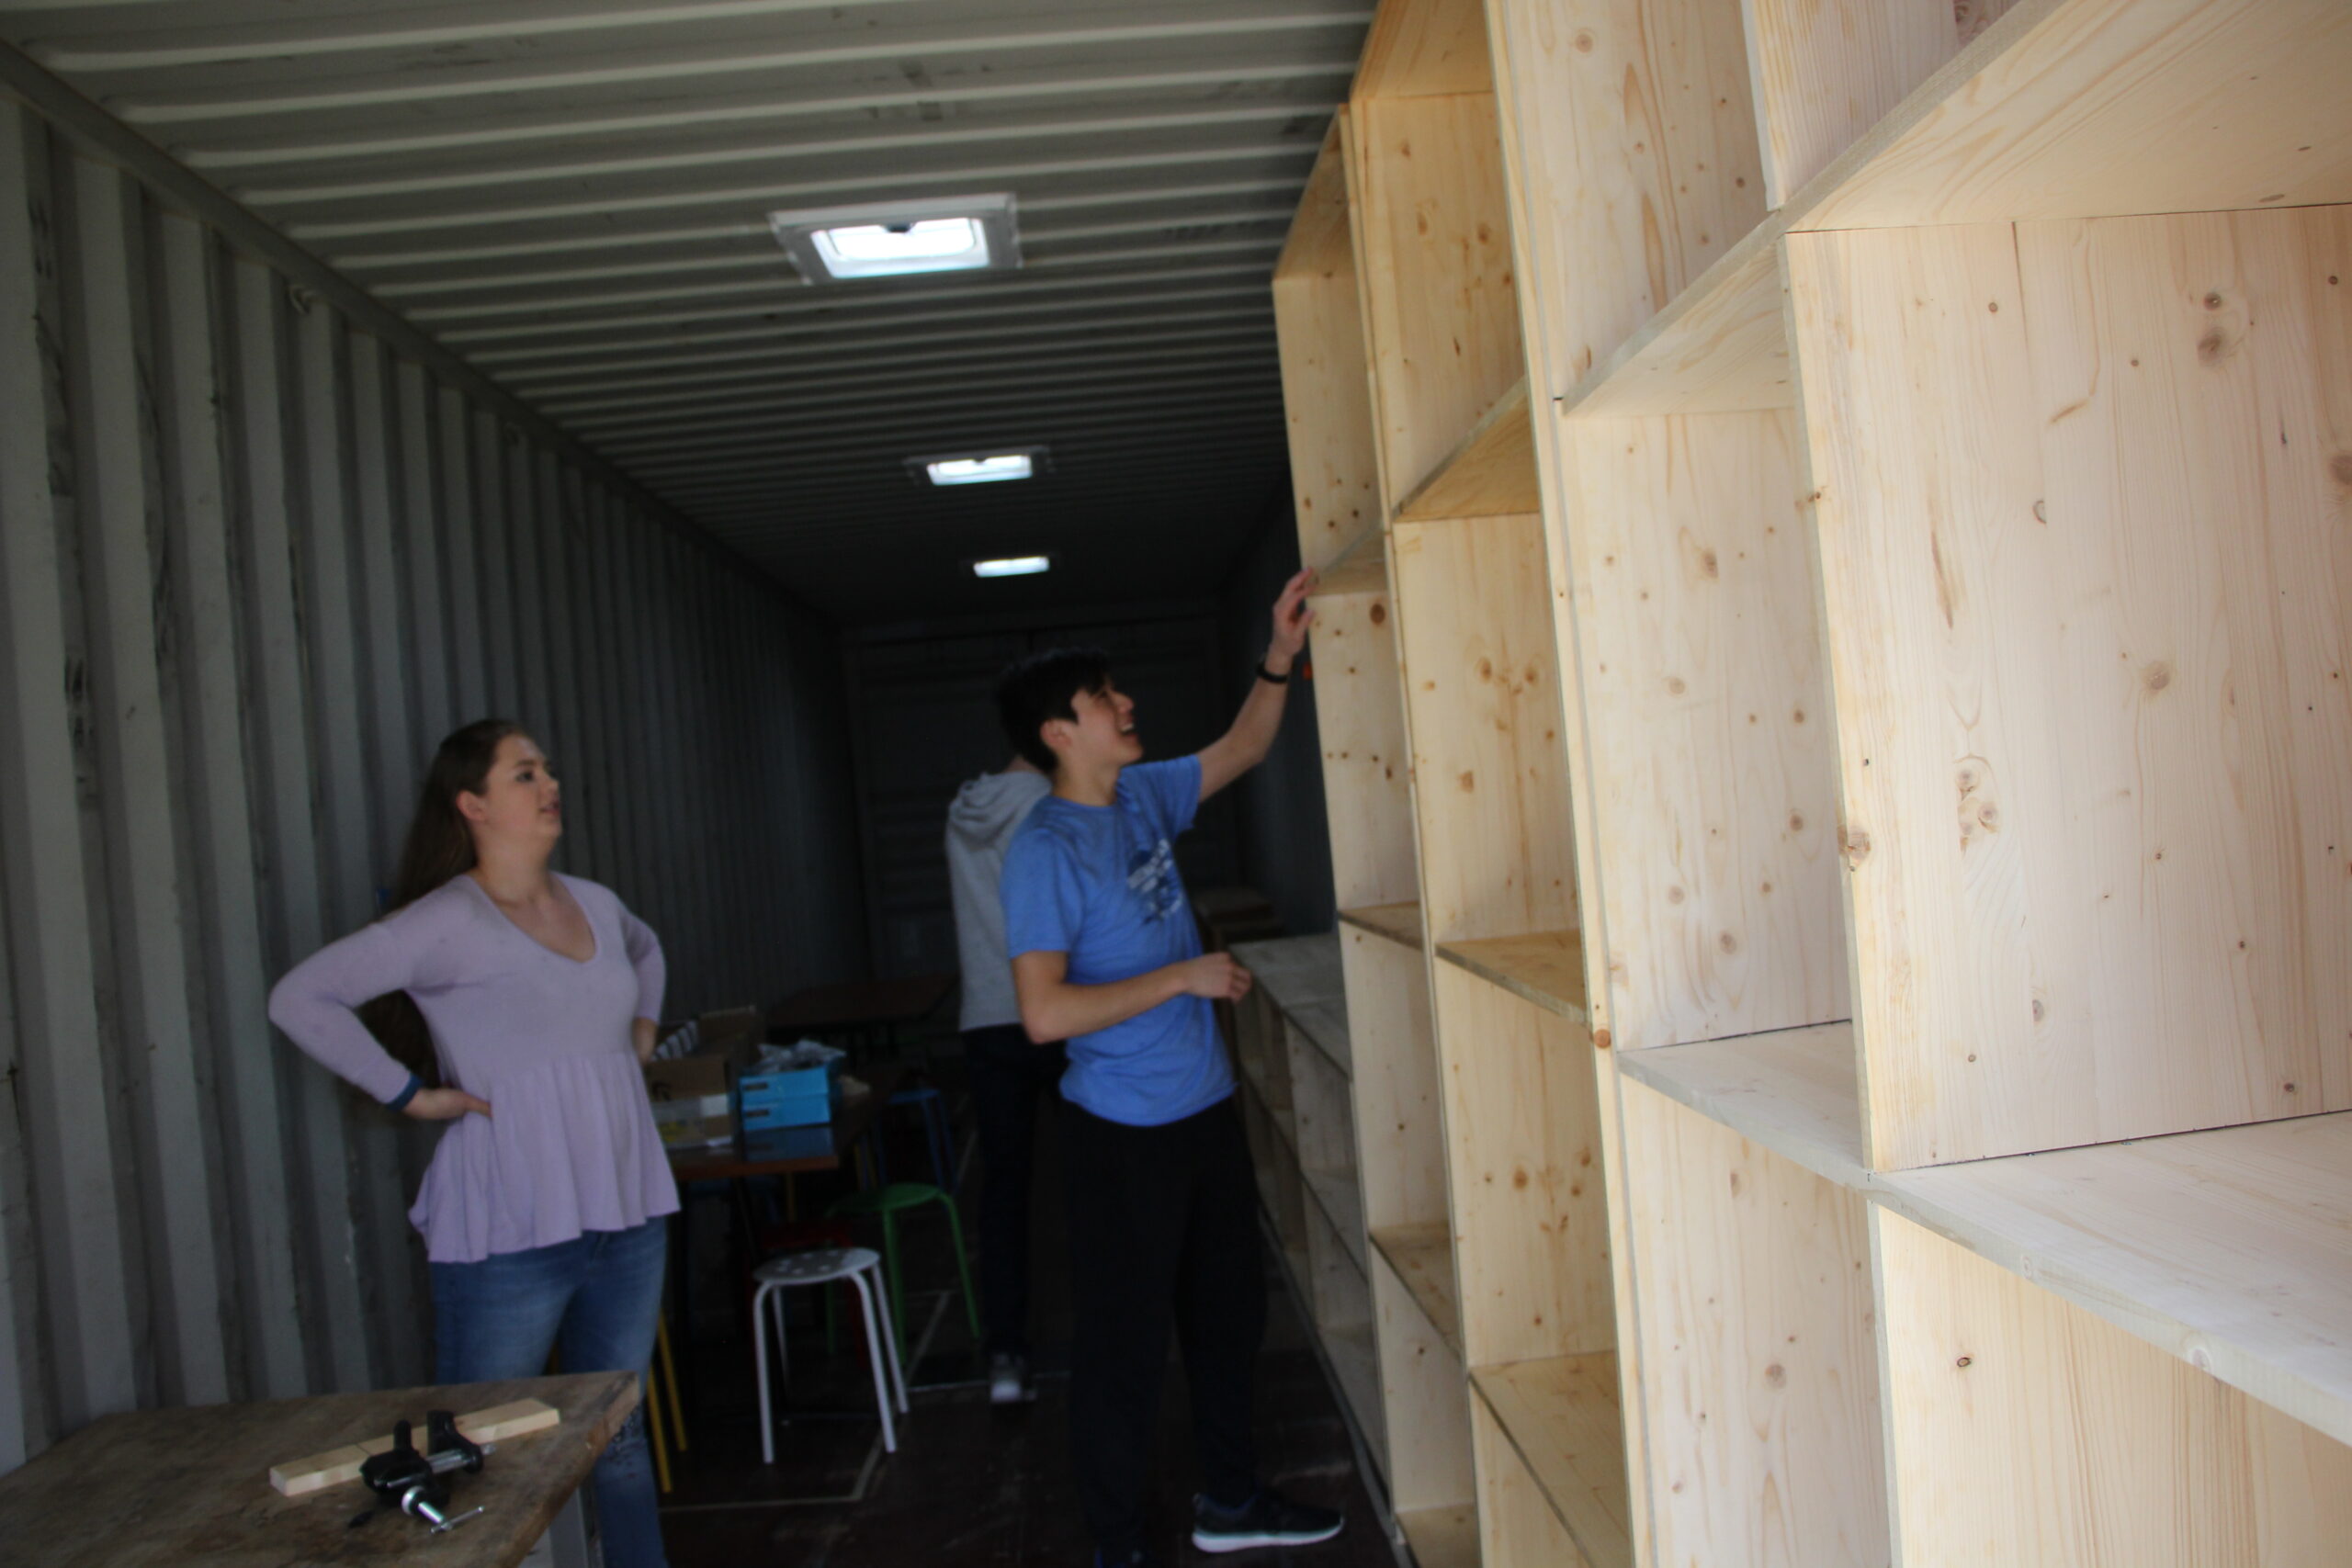 Students in the spring semester of Design 101 move shelves into a storage container, which will become a functioning design space. The team was recognized at the Global Innovation Challenge for their project.